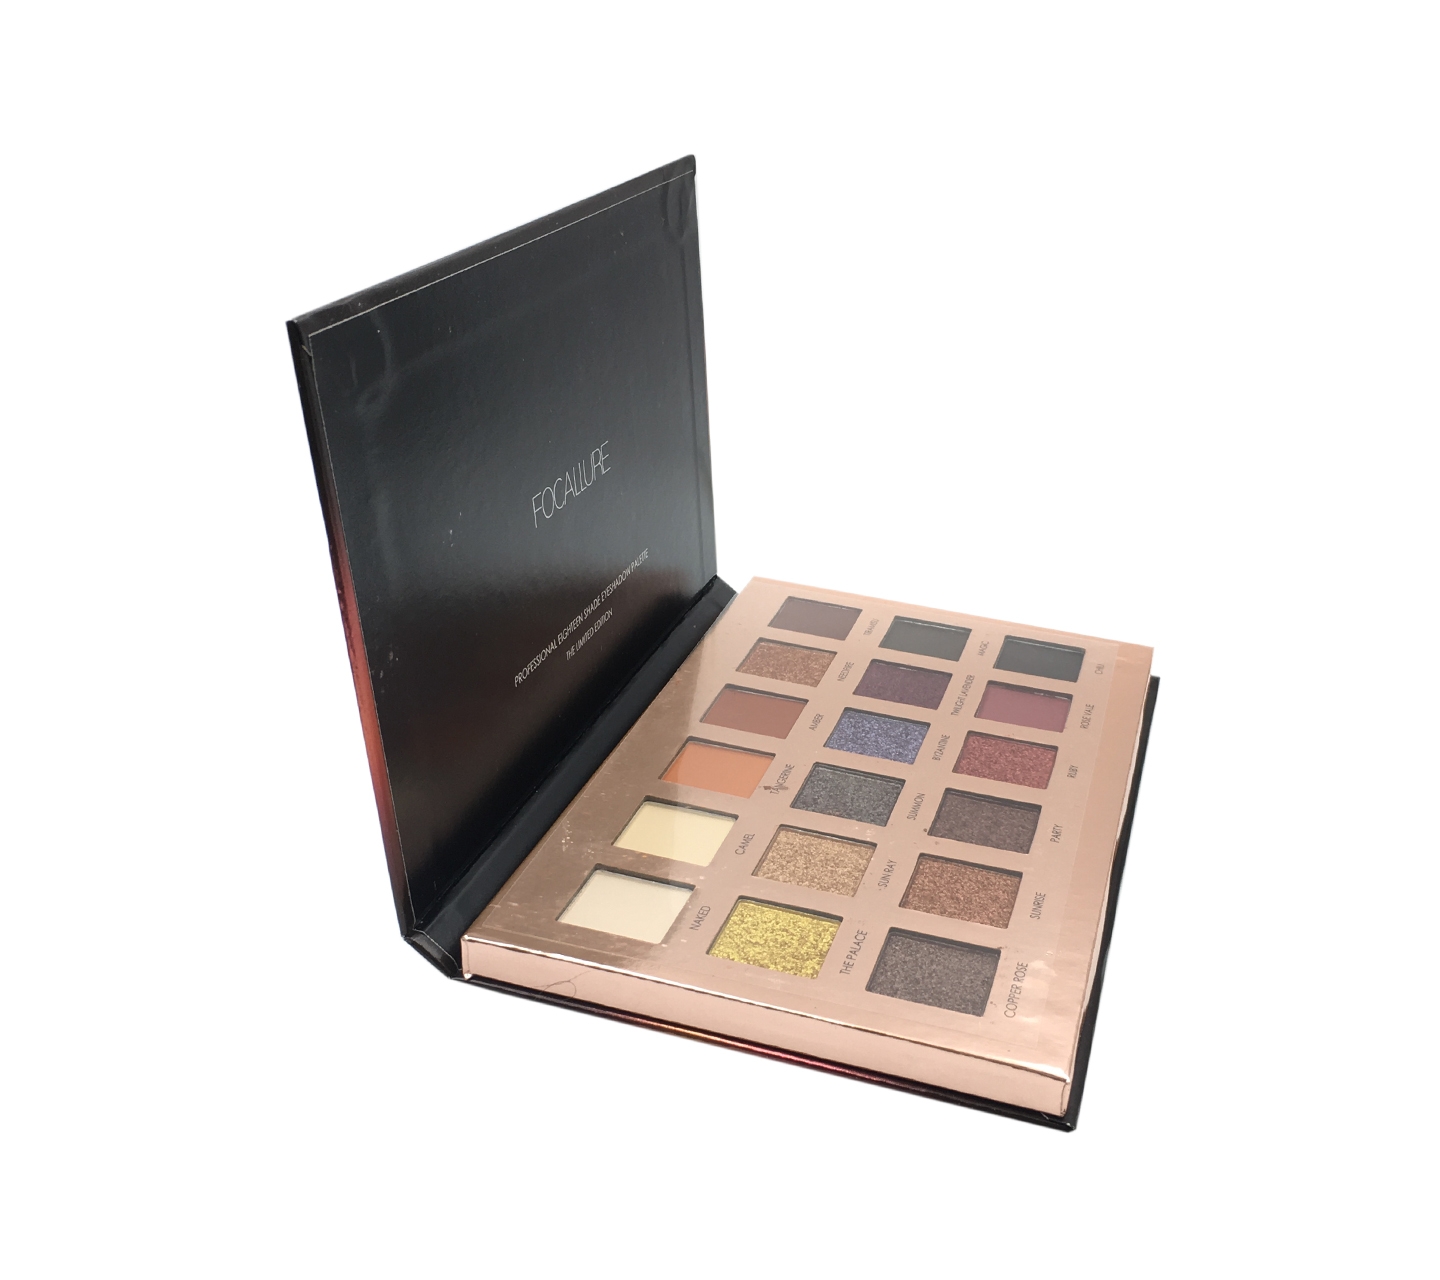 Focallure 18 Shades Full Function Twilight The Limited Edition Sets and Palette